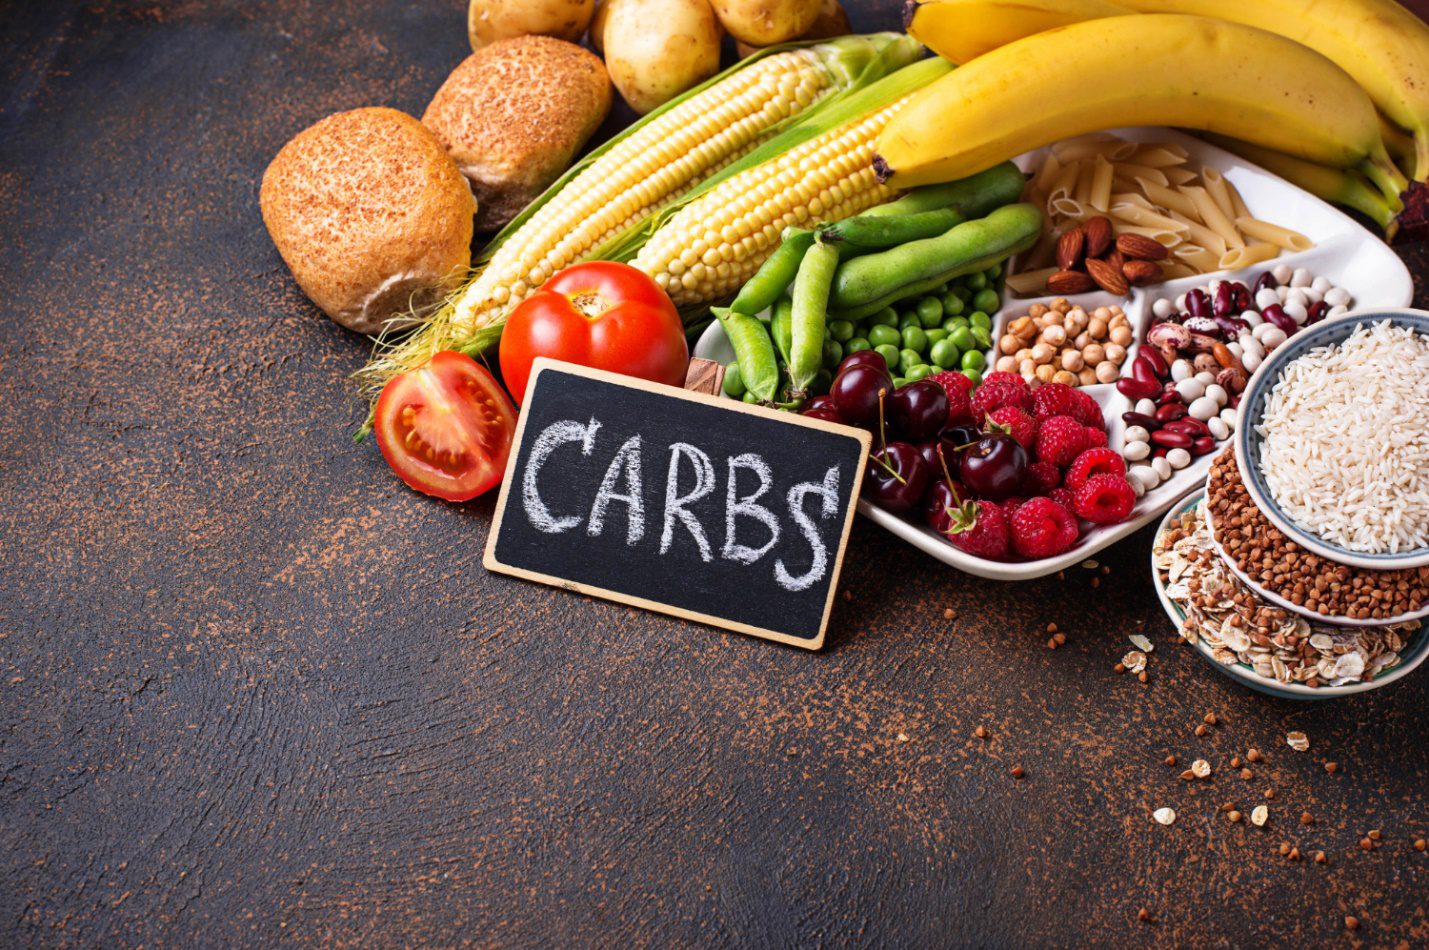 Keto Carbohydrate: What Are The Max Carbs On Keto You Can Consume